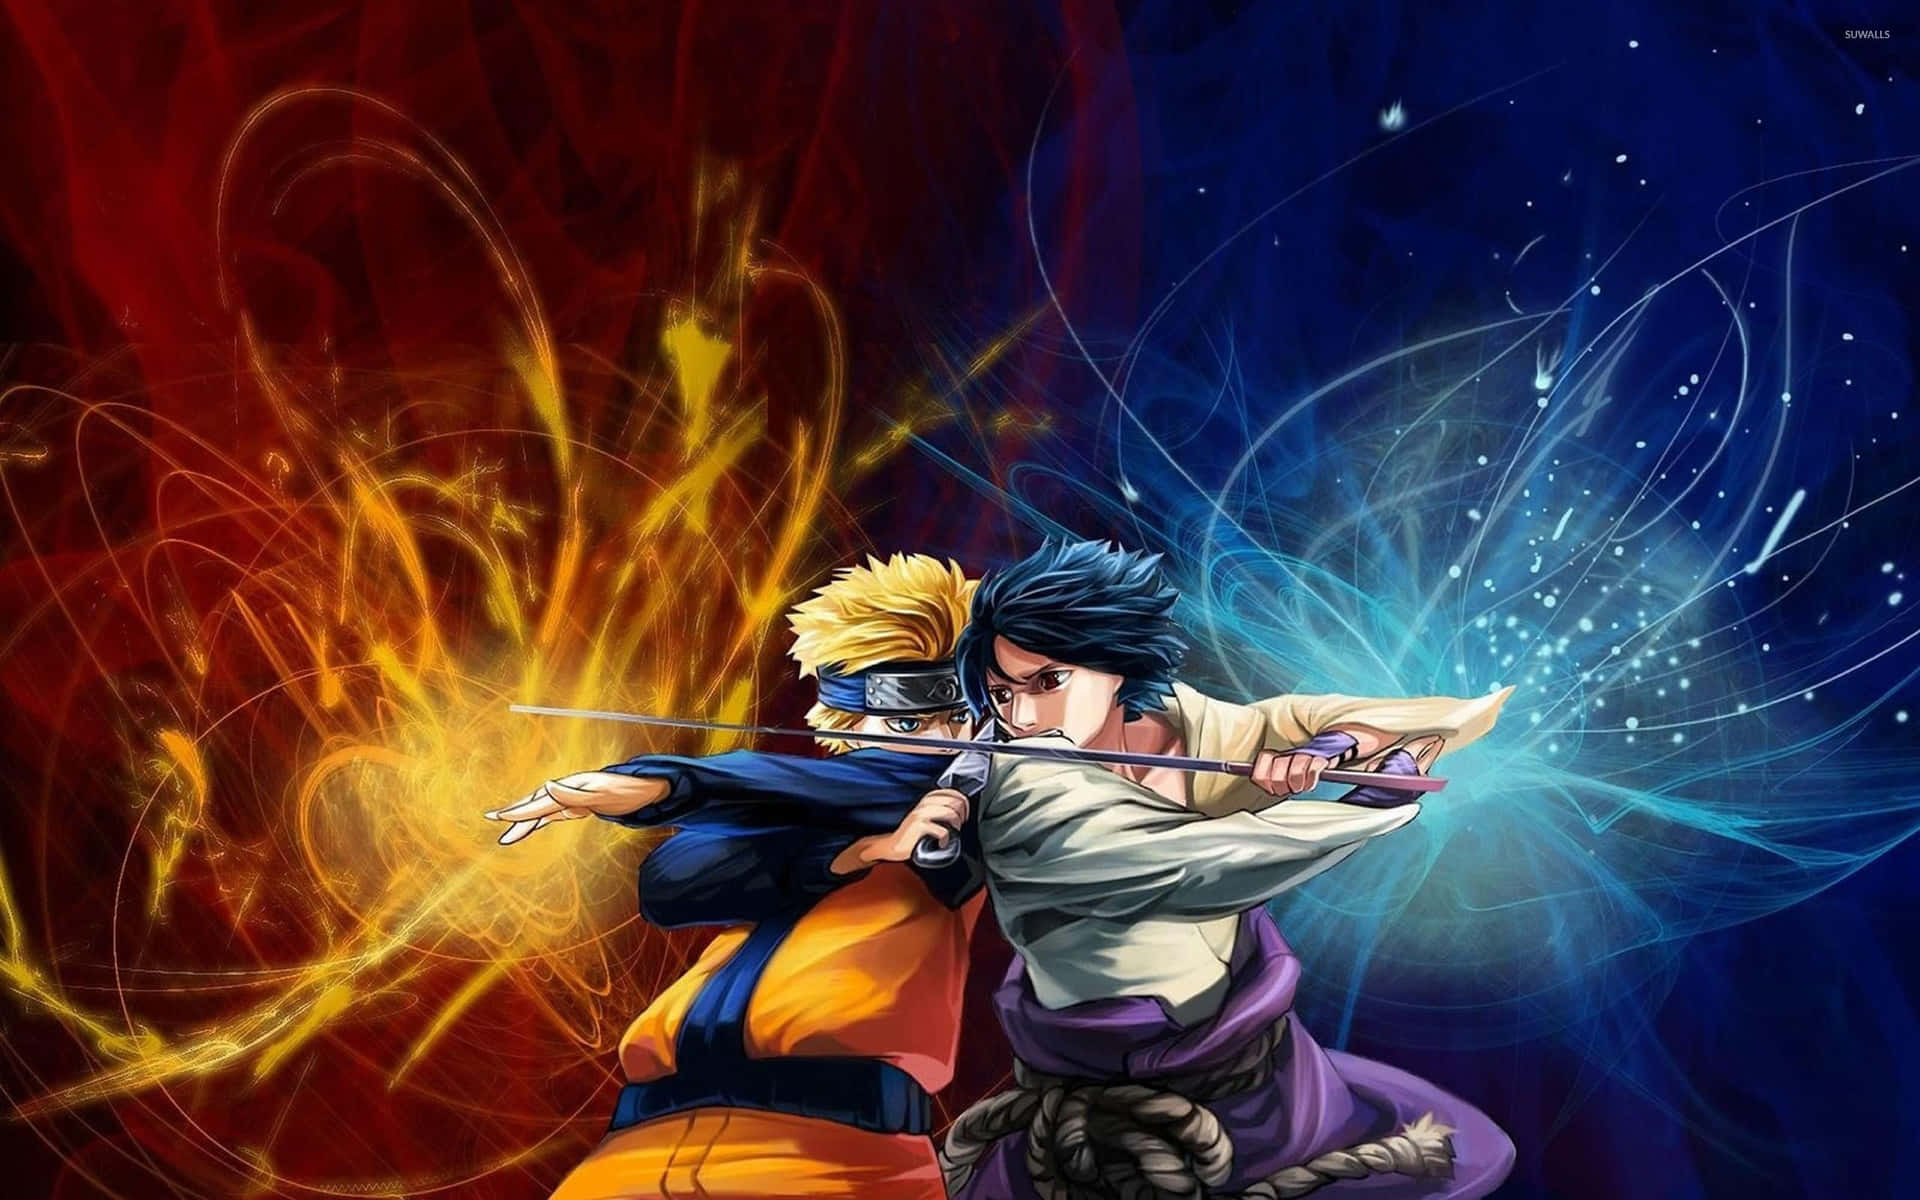 Enjoy an intense battle as Naruto in the thrilling world of Naruto Neon Wallpaper